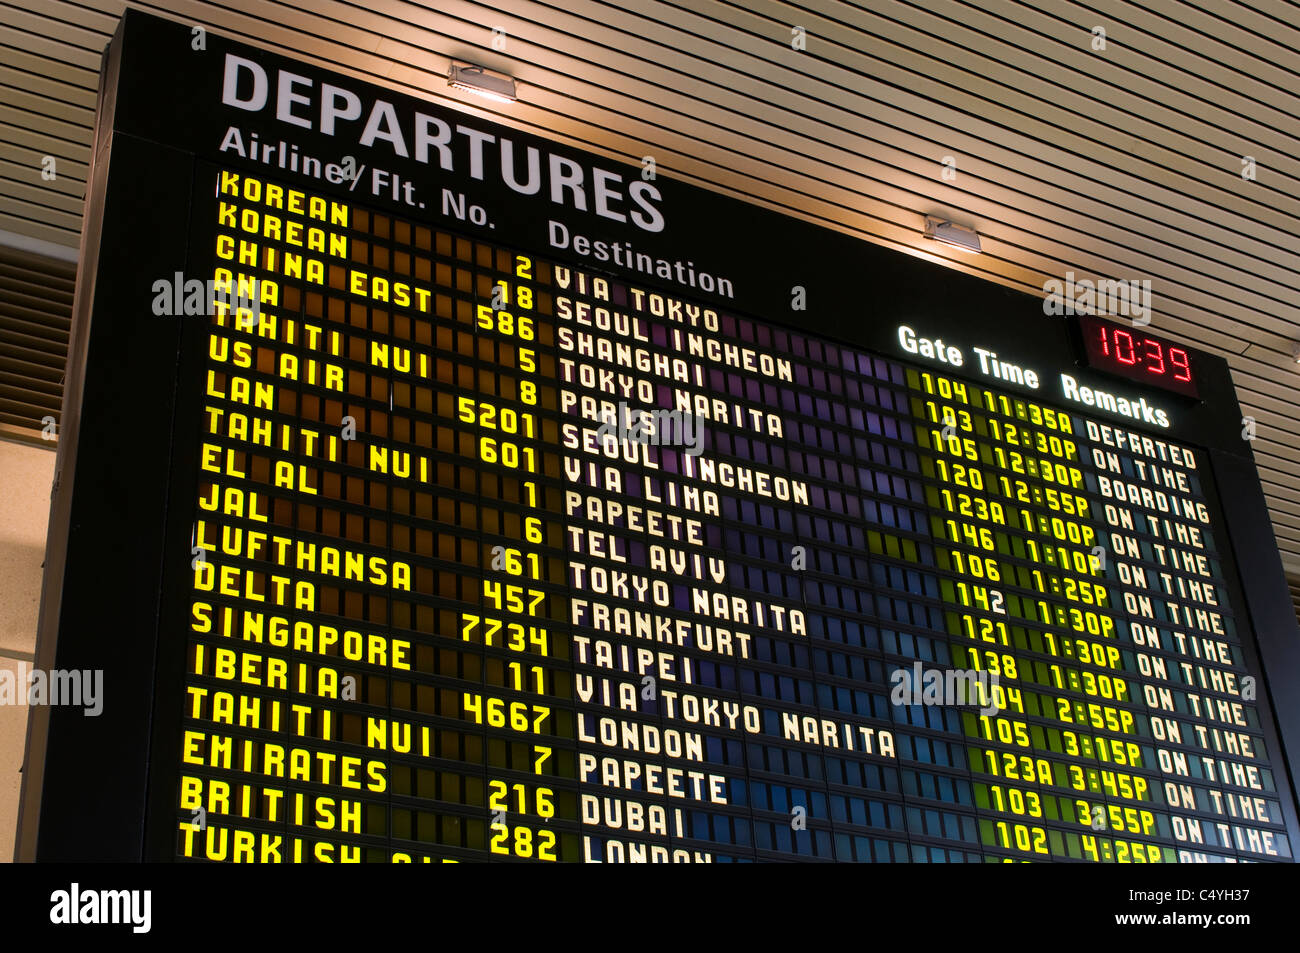 Flight schedule display photography and - Alamy